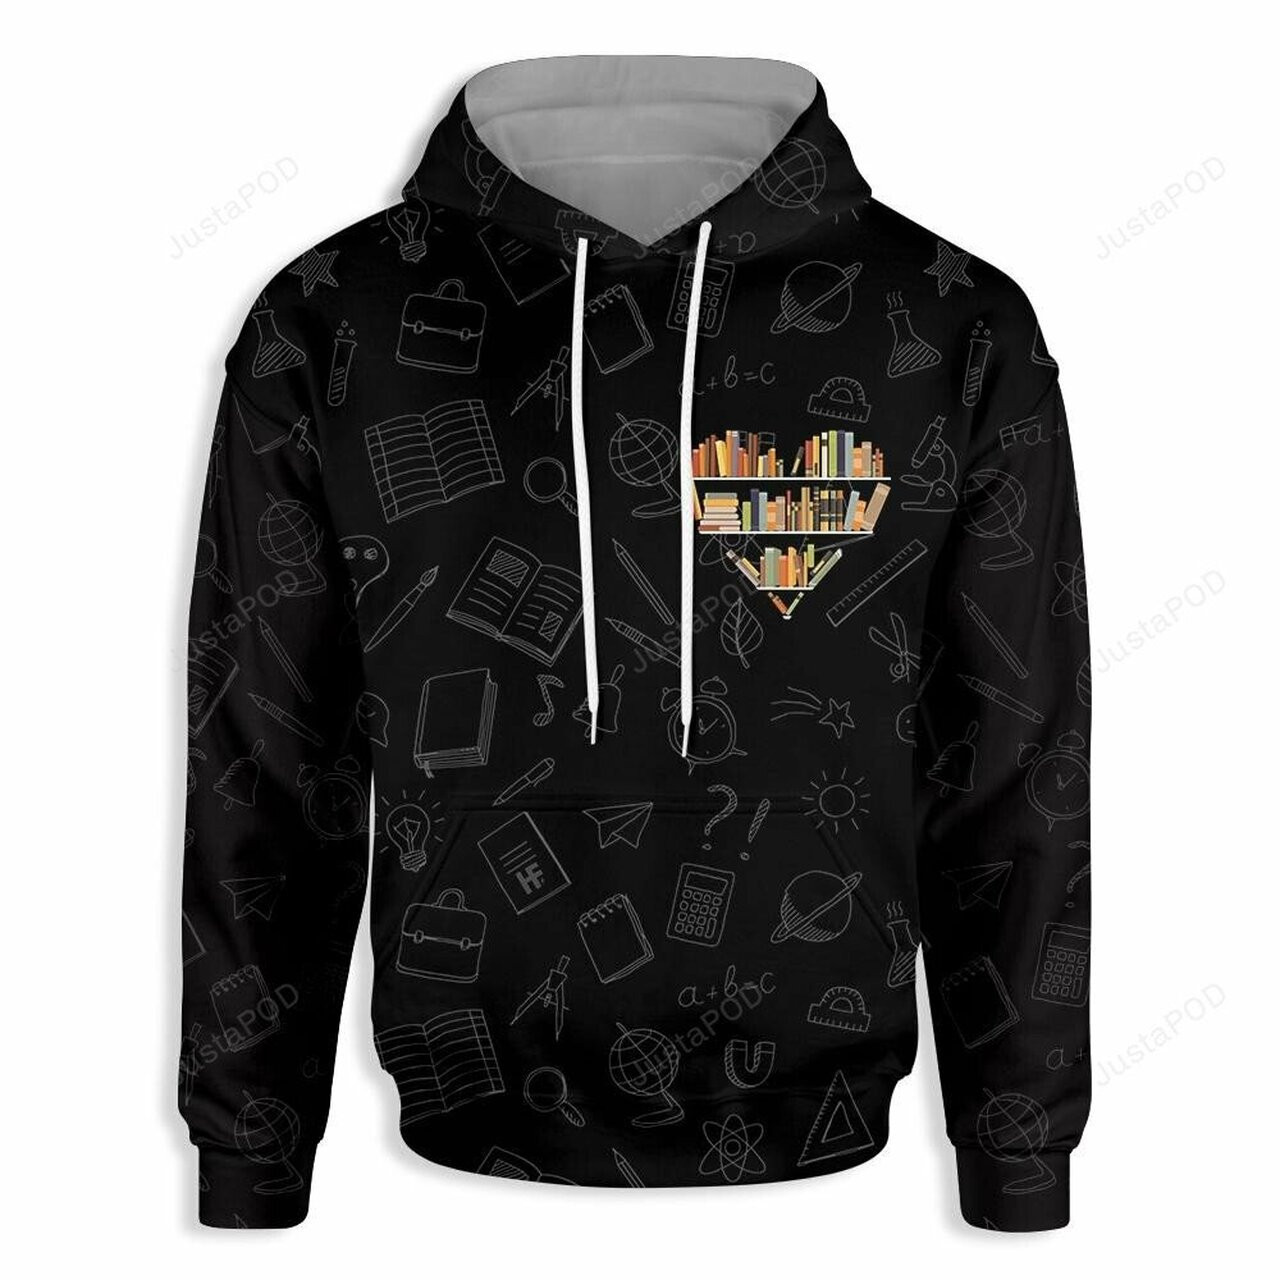 Just A Teacher Who Love Books 3d All Over Printed Hoodie